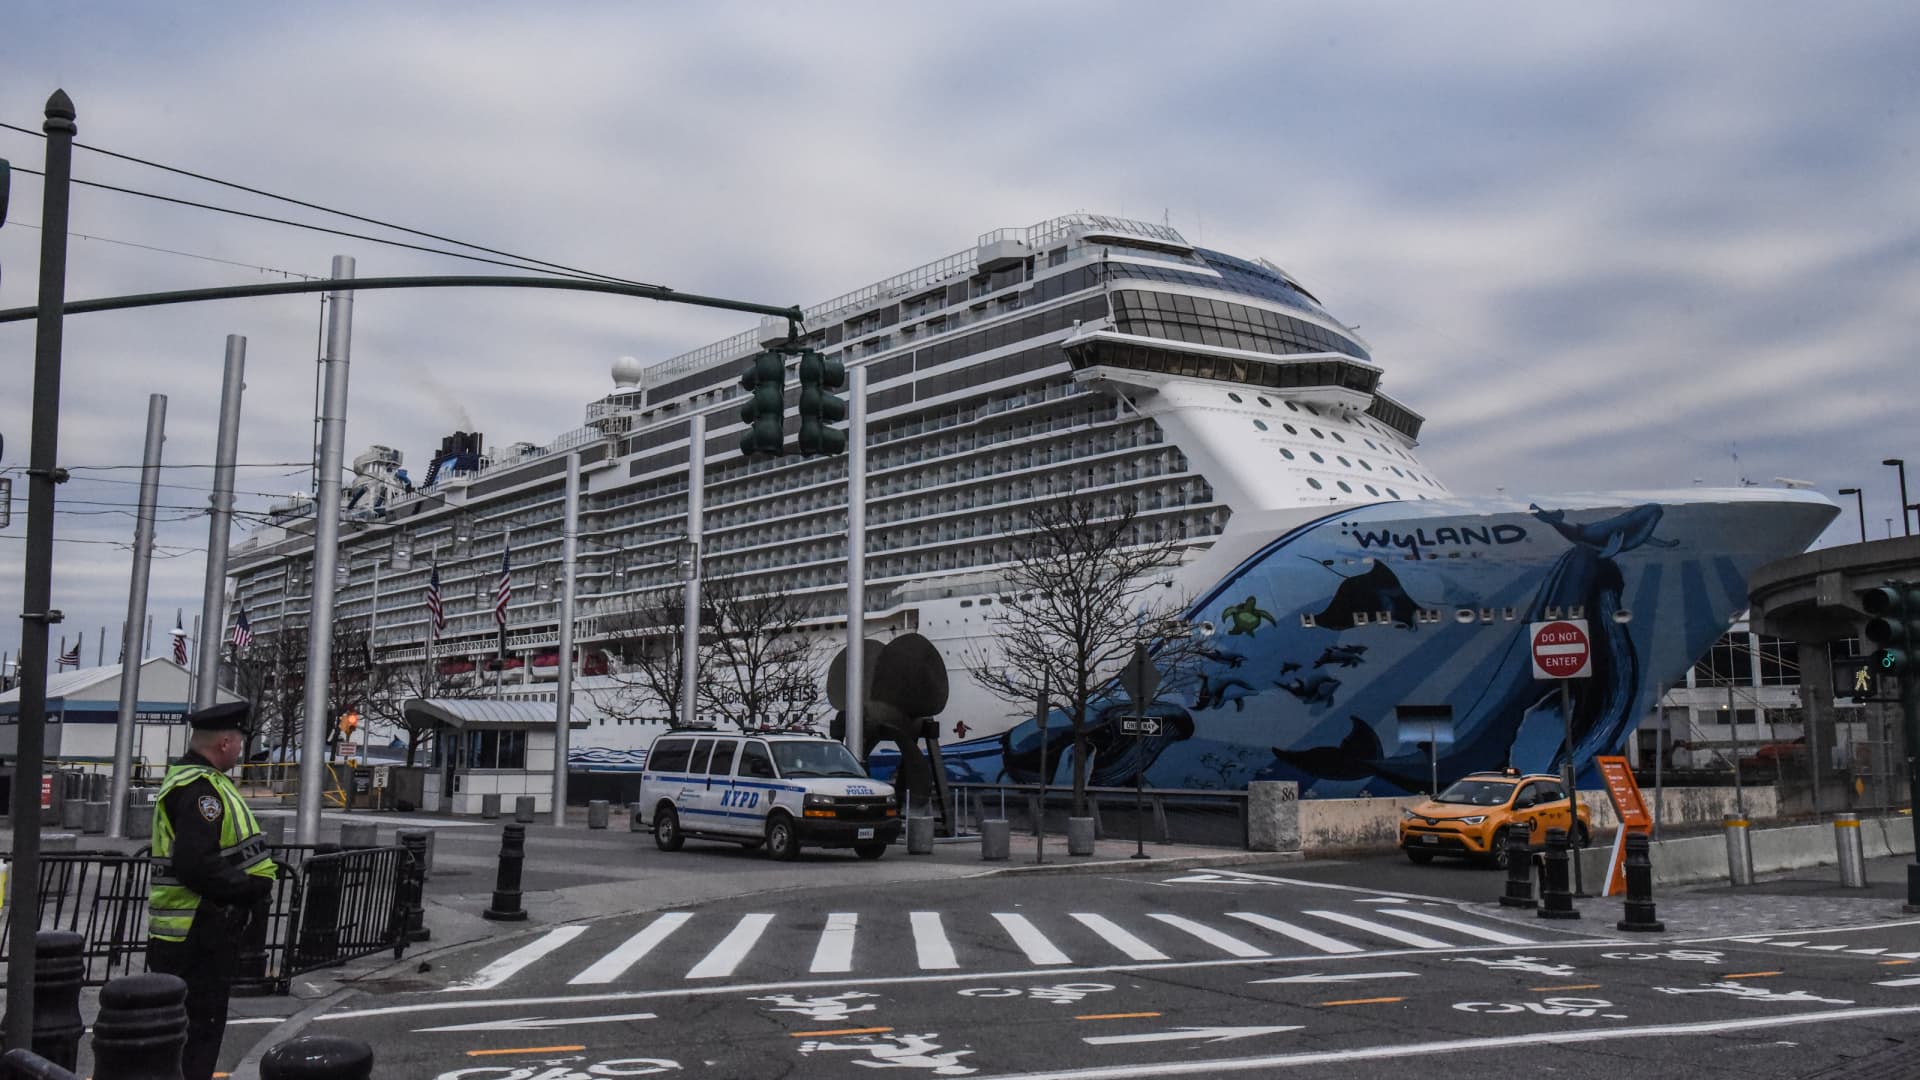 The Norwegian Bliss cruise ship is seen docked on March 15, 2020 in New York City.